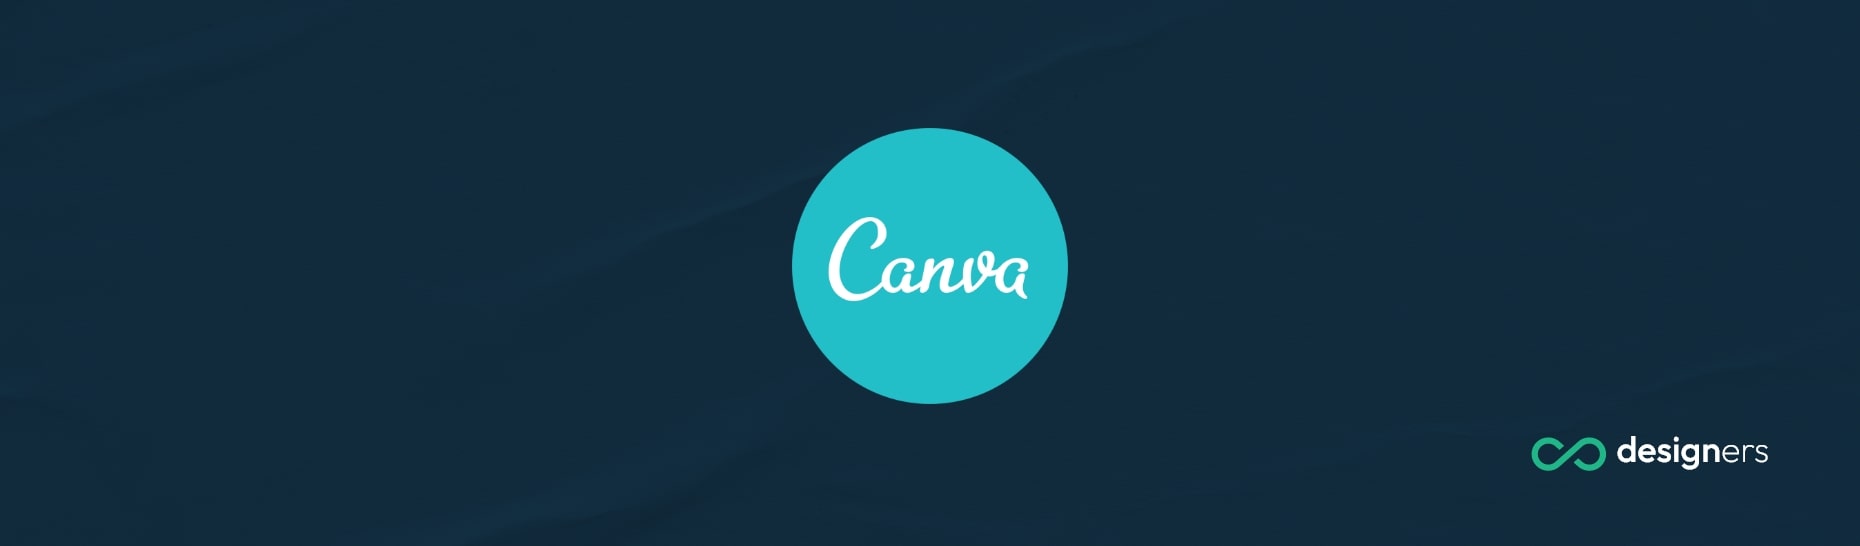 Can I Build an App in Canva?